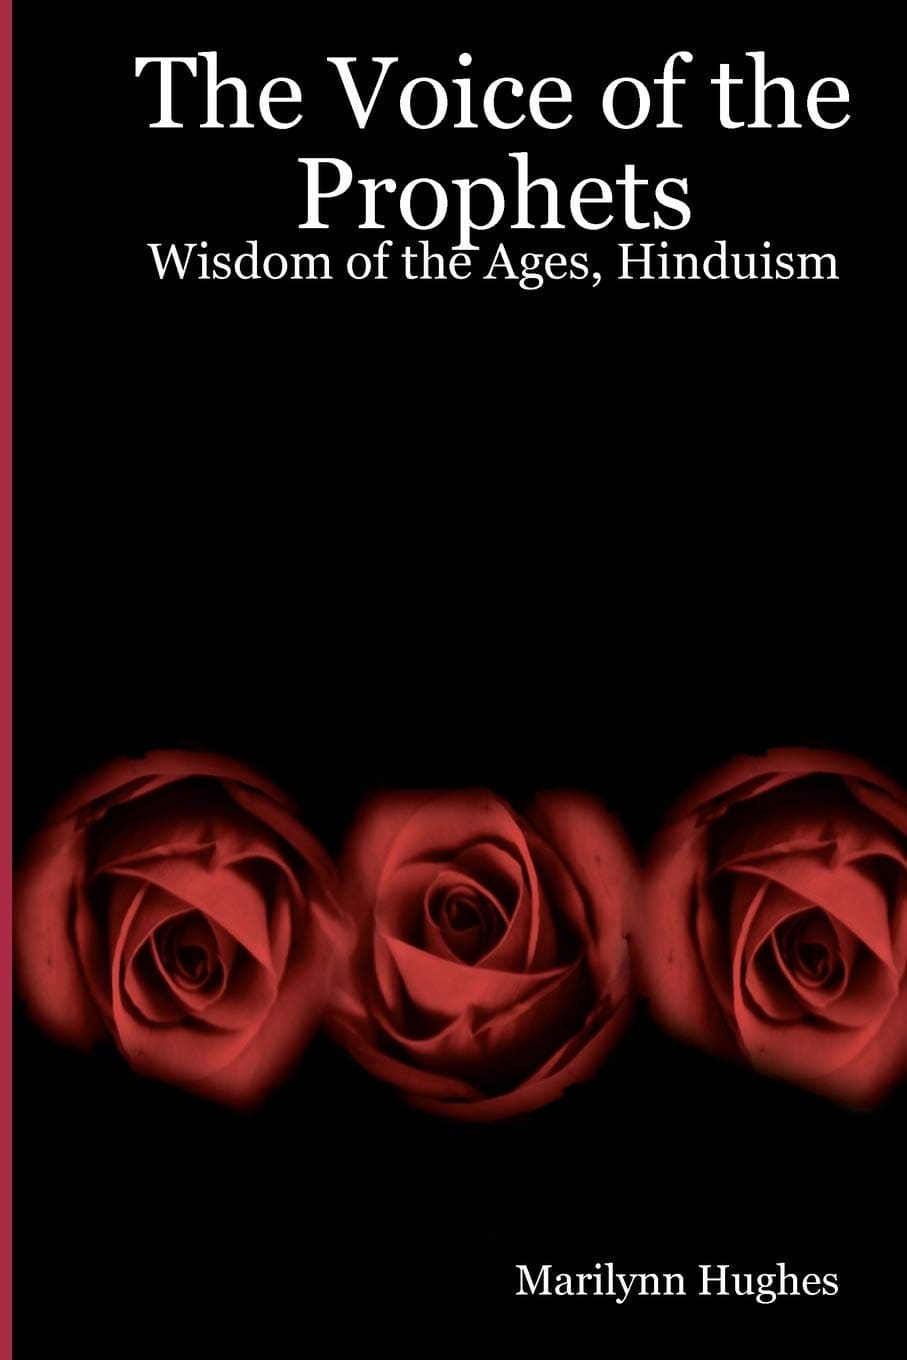 Wisdom of the Ages, Hinduism, By Marilynn Hughes - An Encyclopedia of Ancient Sacred Texts in Twelve Volumes - An Out-of-Body Travel Book